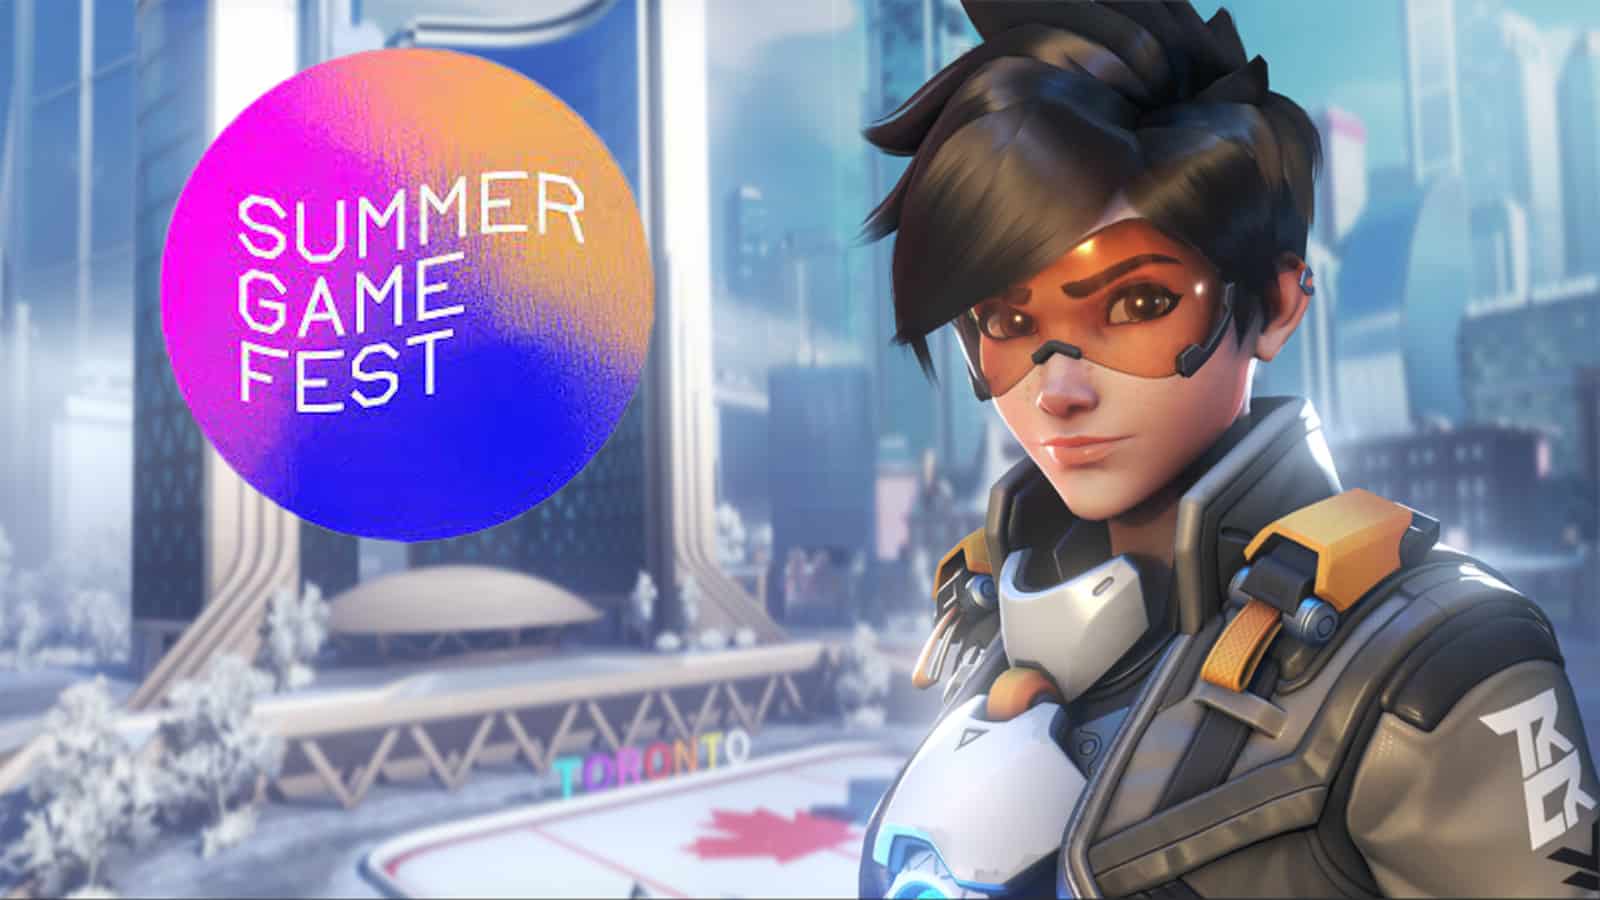 Tracer in Overwatch 2 Toronto map for Summer Game Fest